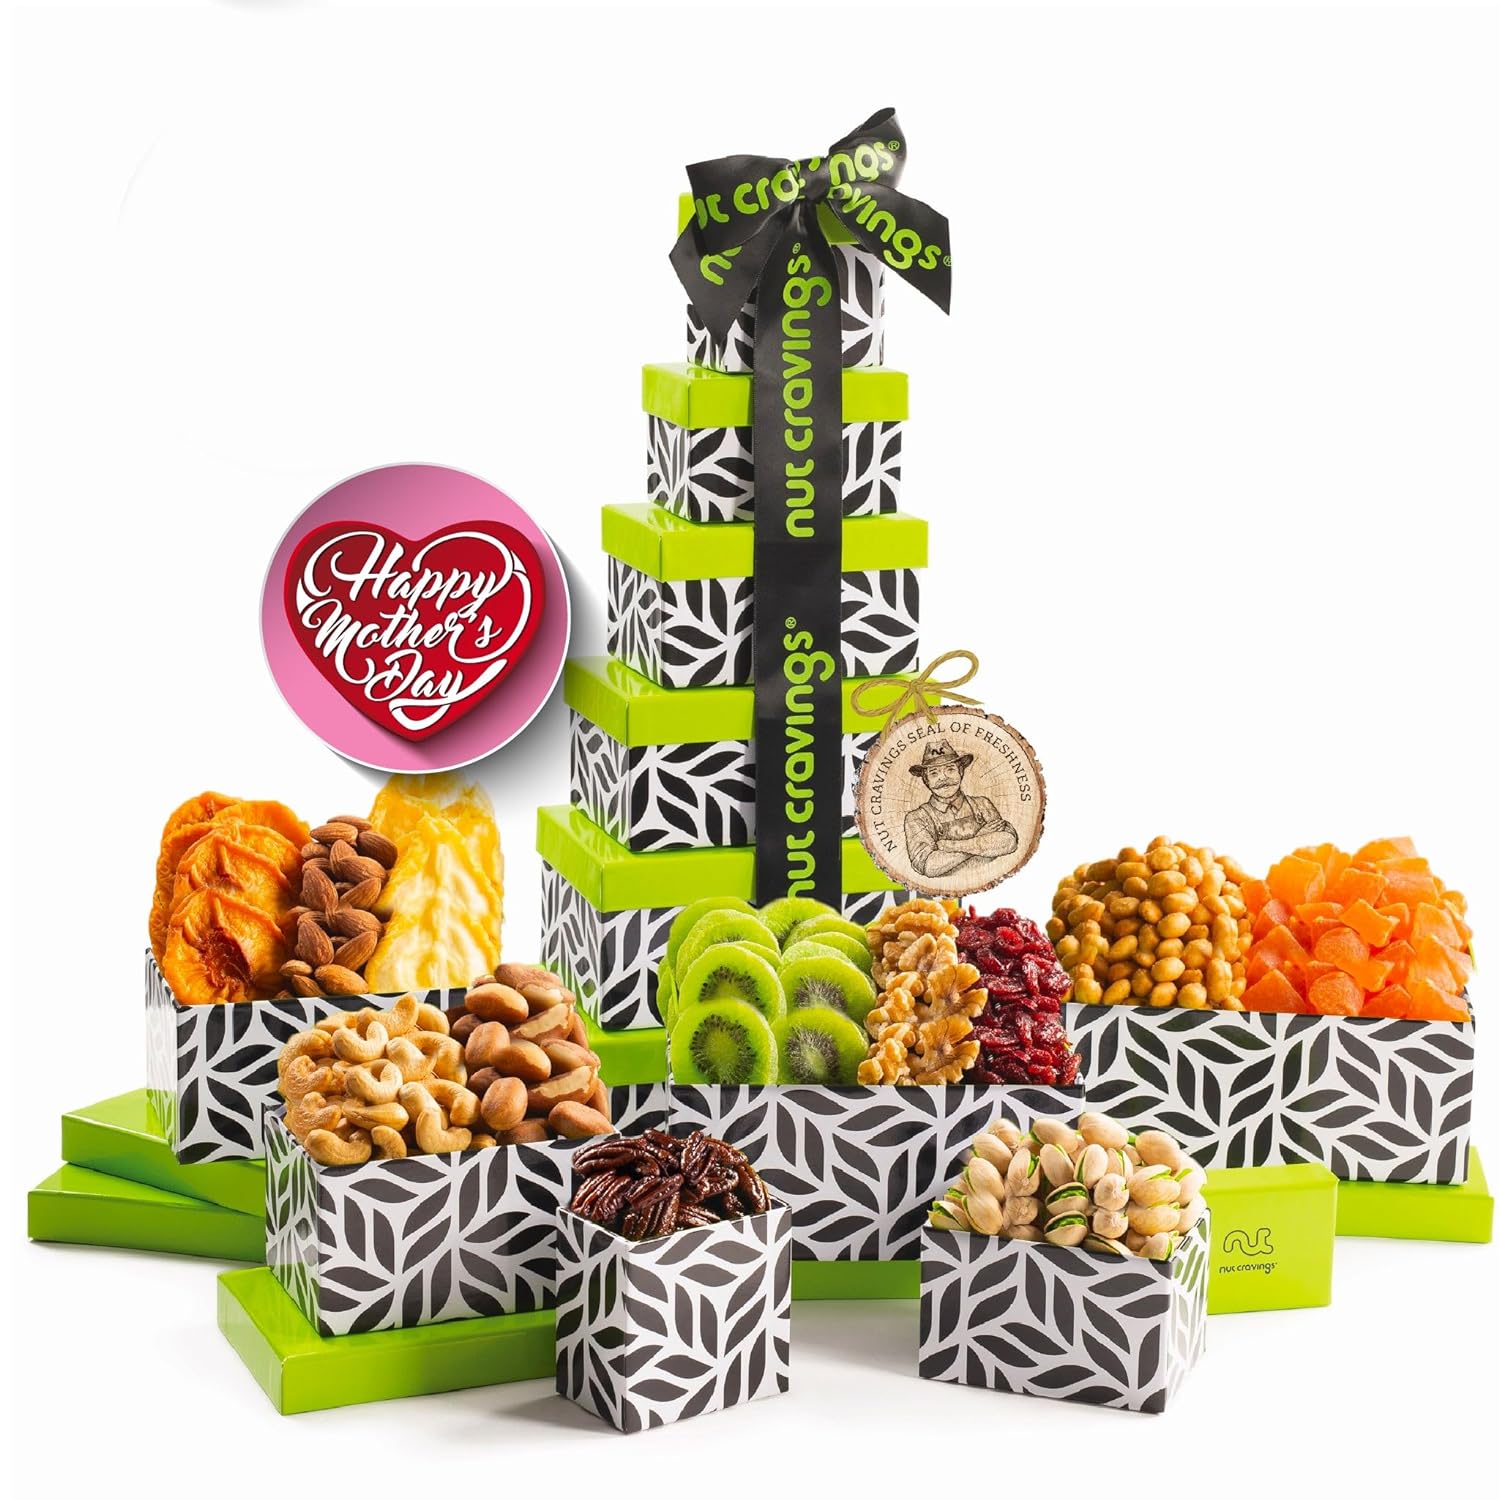 Nut Cravings Gourmet Collection - Mothers Day Dried Fruit & Mixed Nuts Gift Basket Leaf Tower + Ribbon (12 Assortments) Arrangement Platter, Birthday Care Package - Healthy Kosher